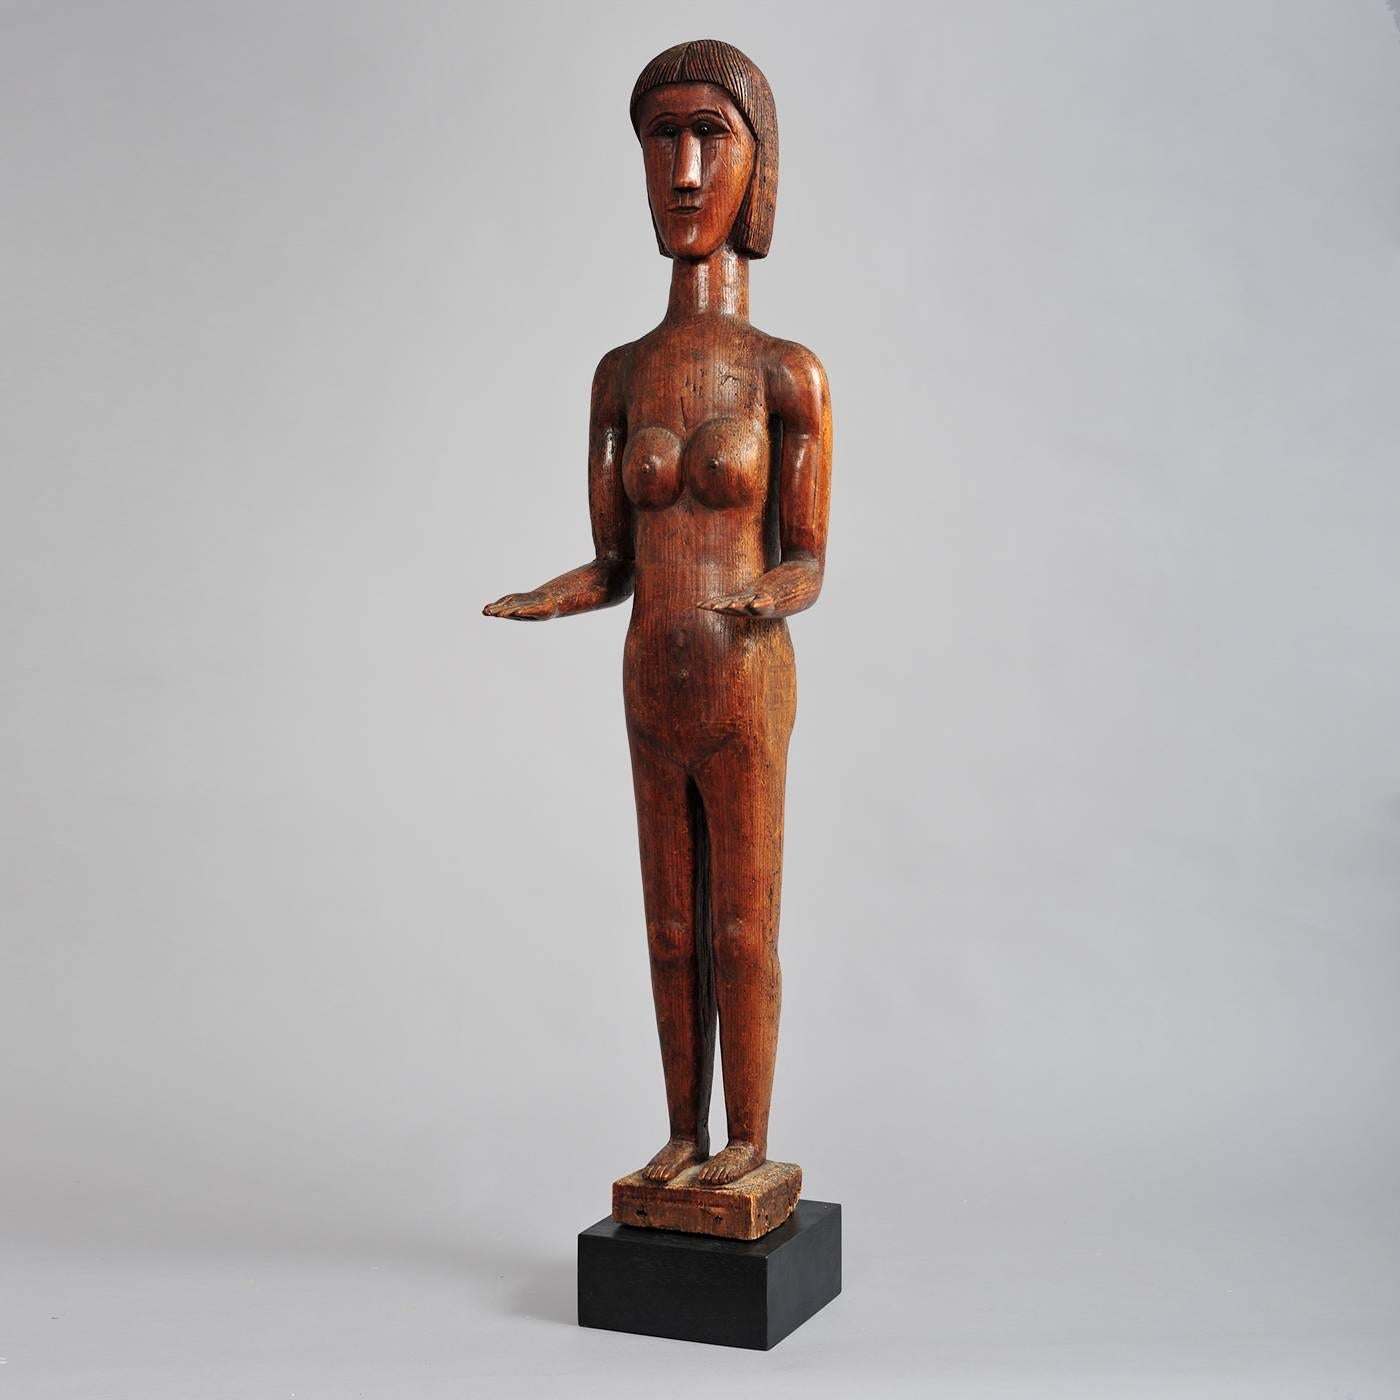 This rare carved figure of a woman made of yellow pine, determined through micro-analysis, was originally found in coastal Georgia and thought to be carved by an African-American living on one of the barrier islands which were largely occupied by